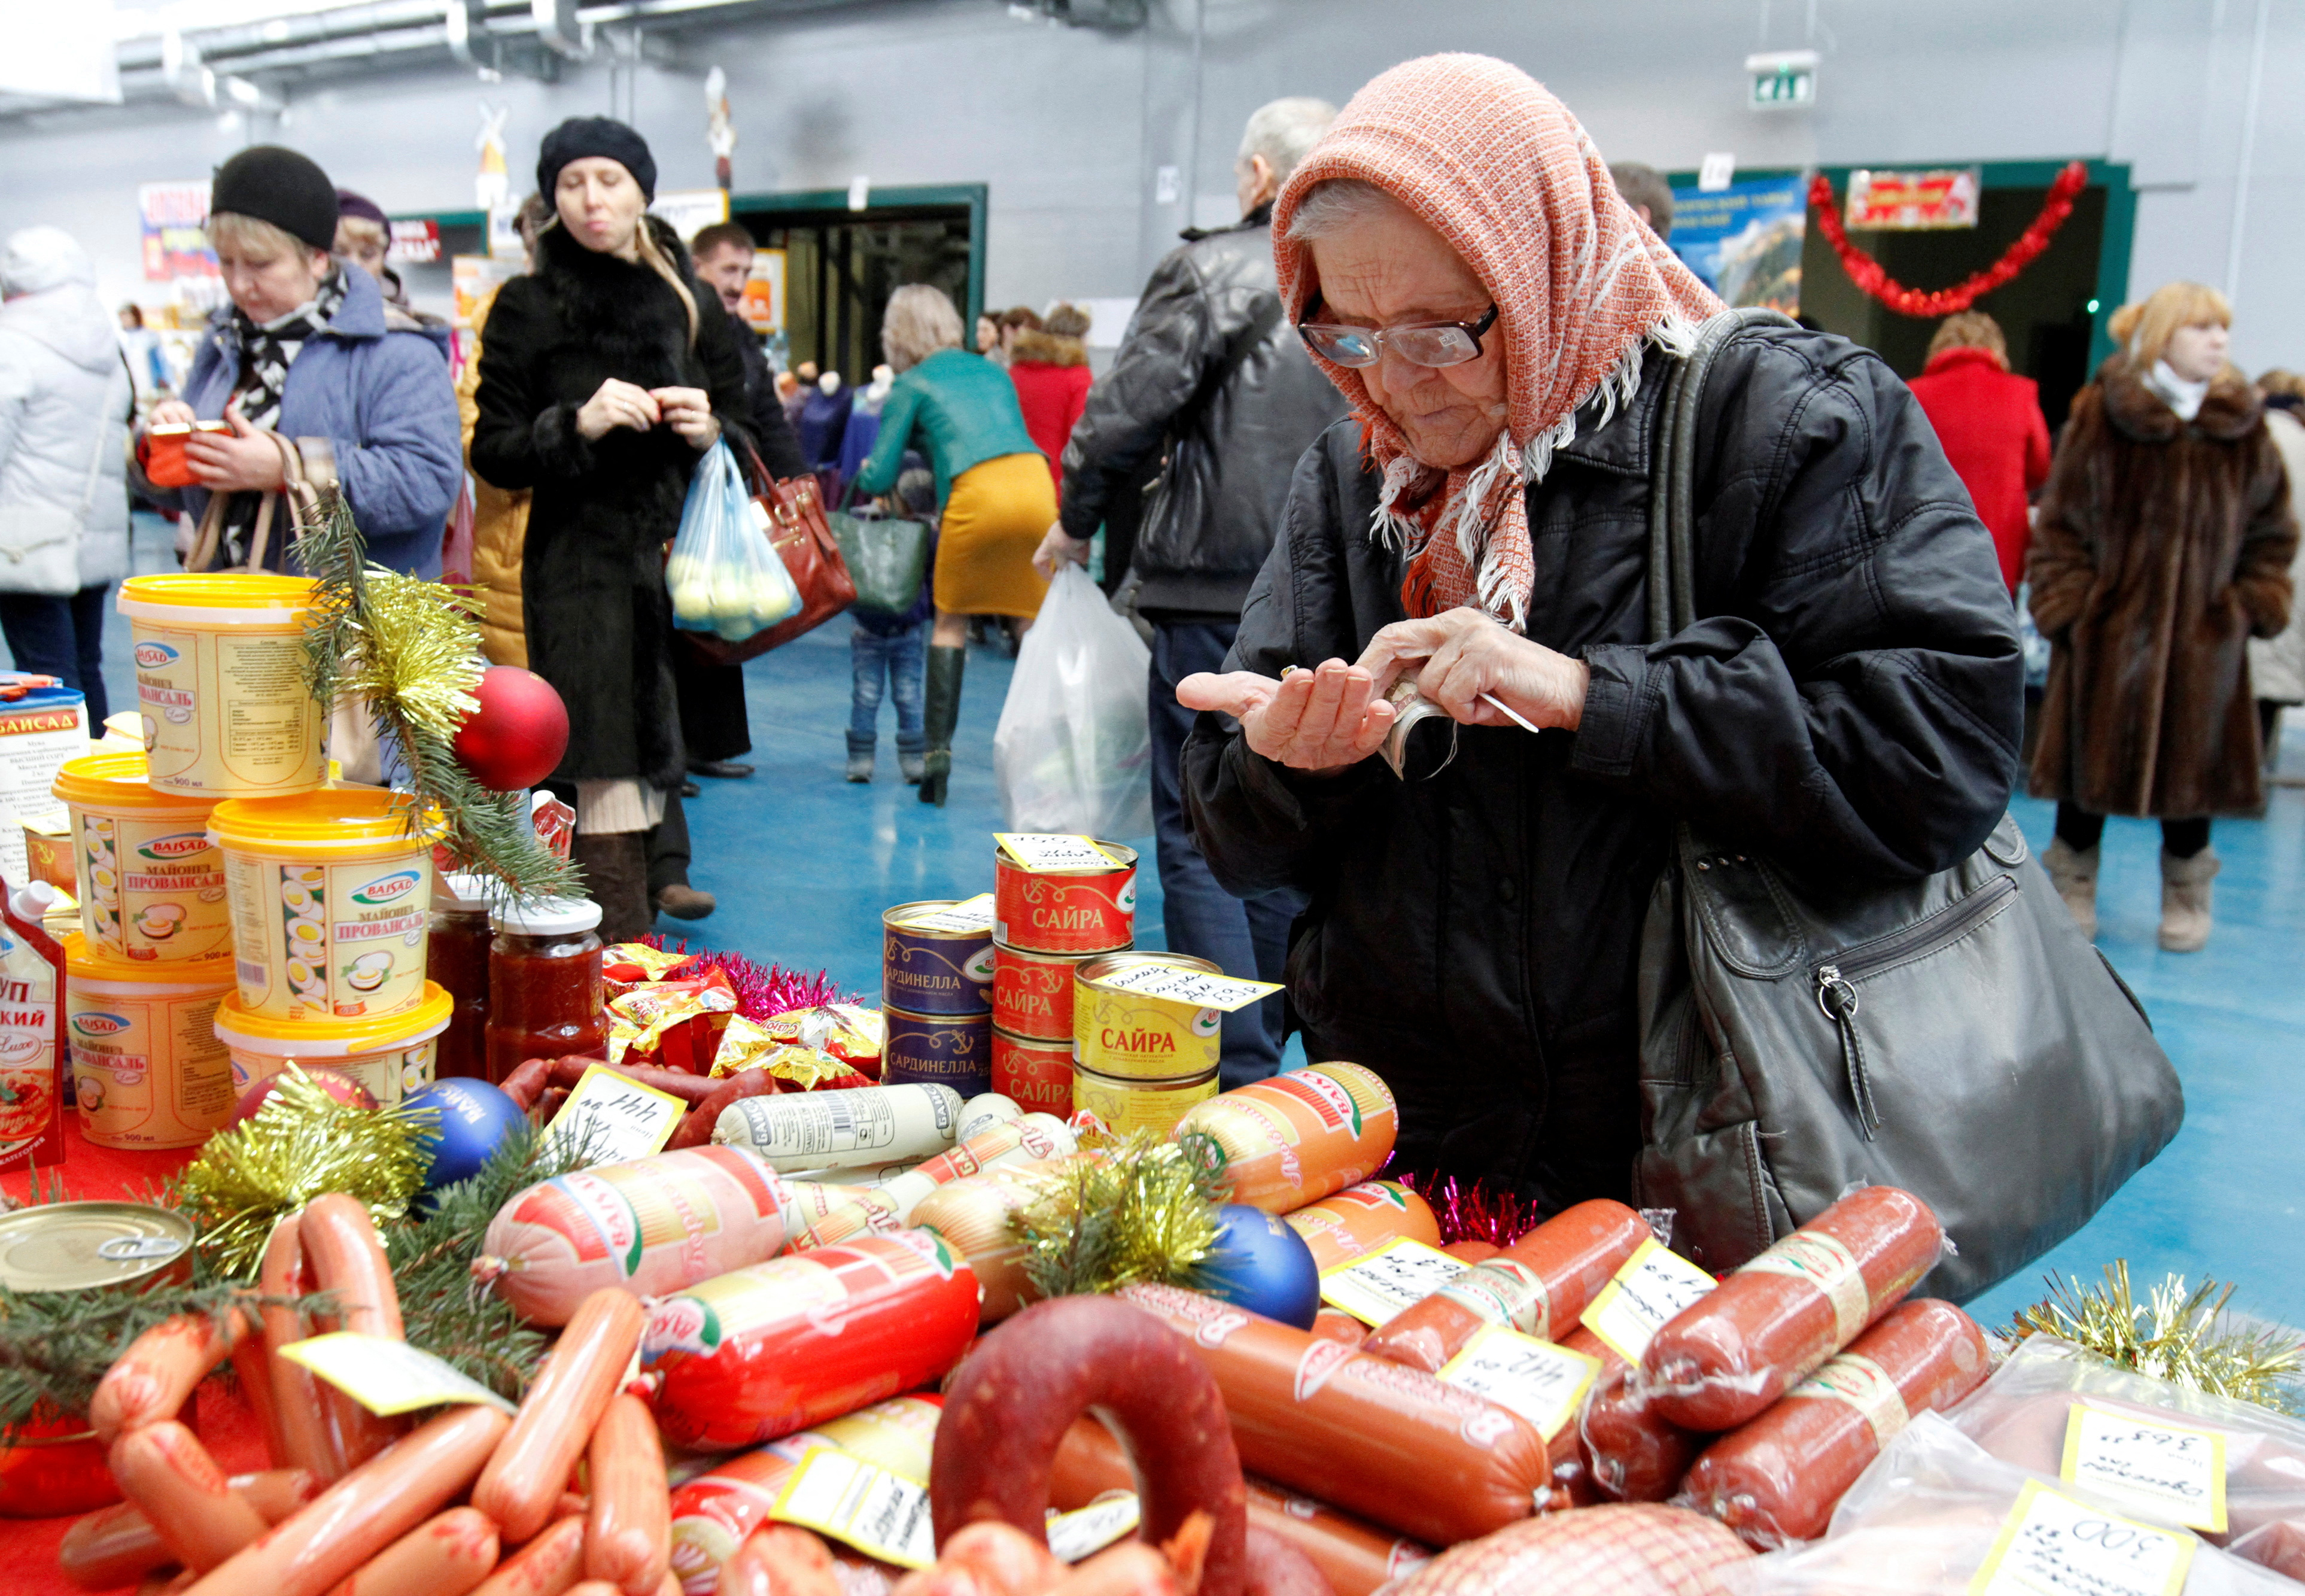 A woman counts money at a food fair in the village of Ulyanovka in Stavropol region